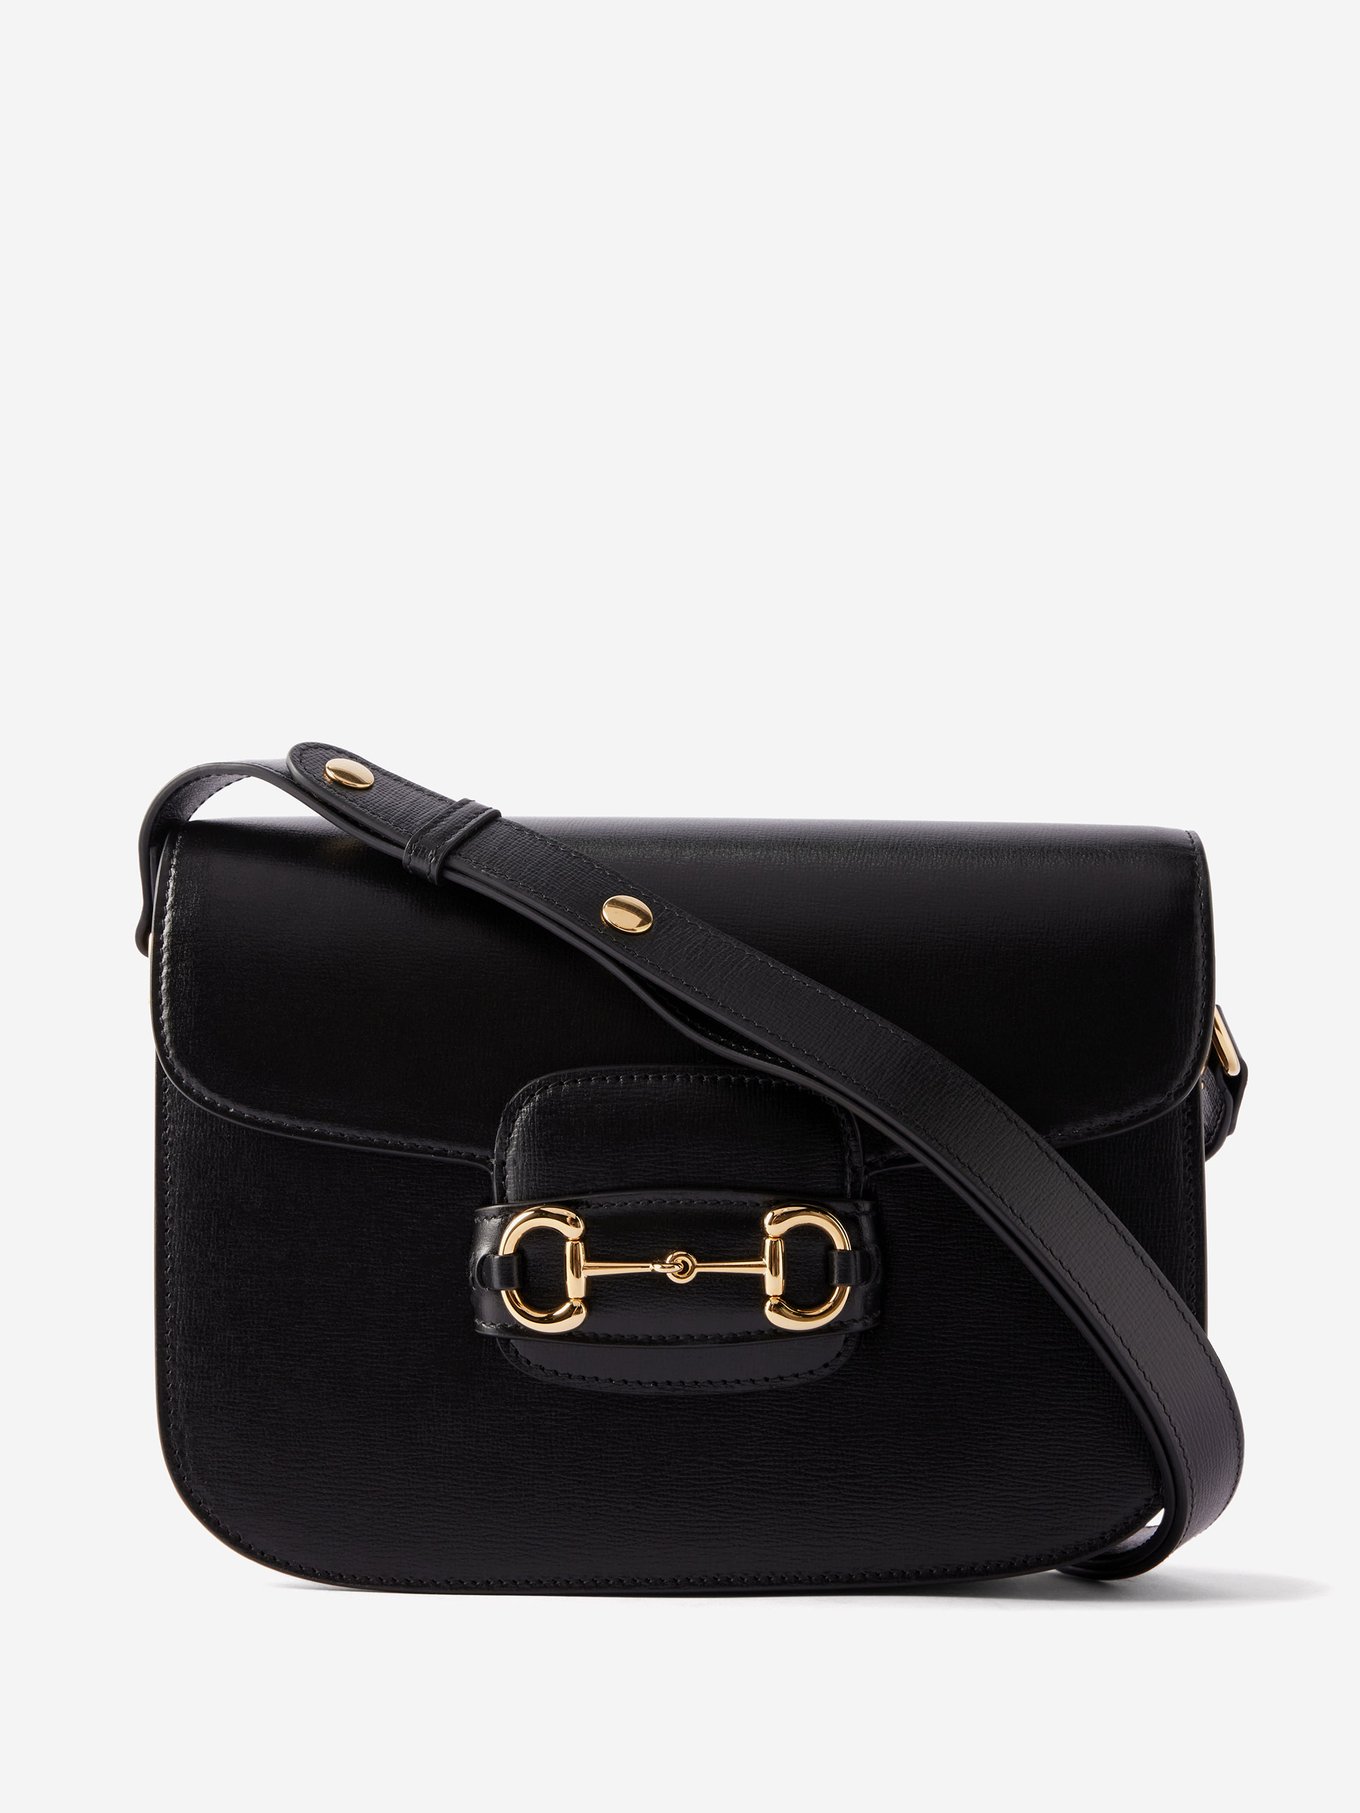 GUCCI -AUTHENTIC BLACK LEATHER & SUEDE SHOULDER BAG-GOLD HARDWARE AND CLASP